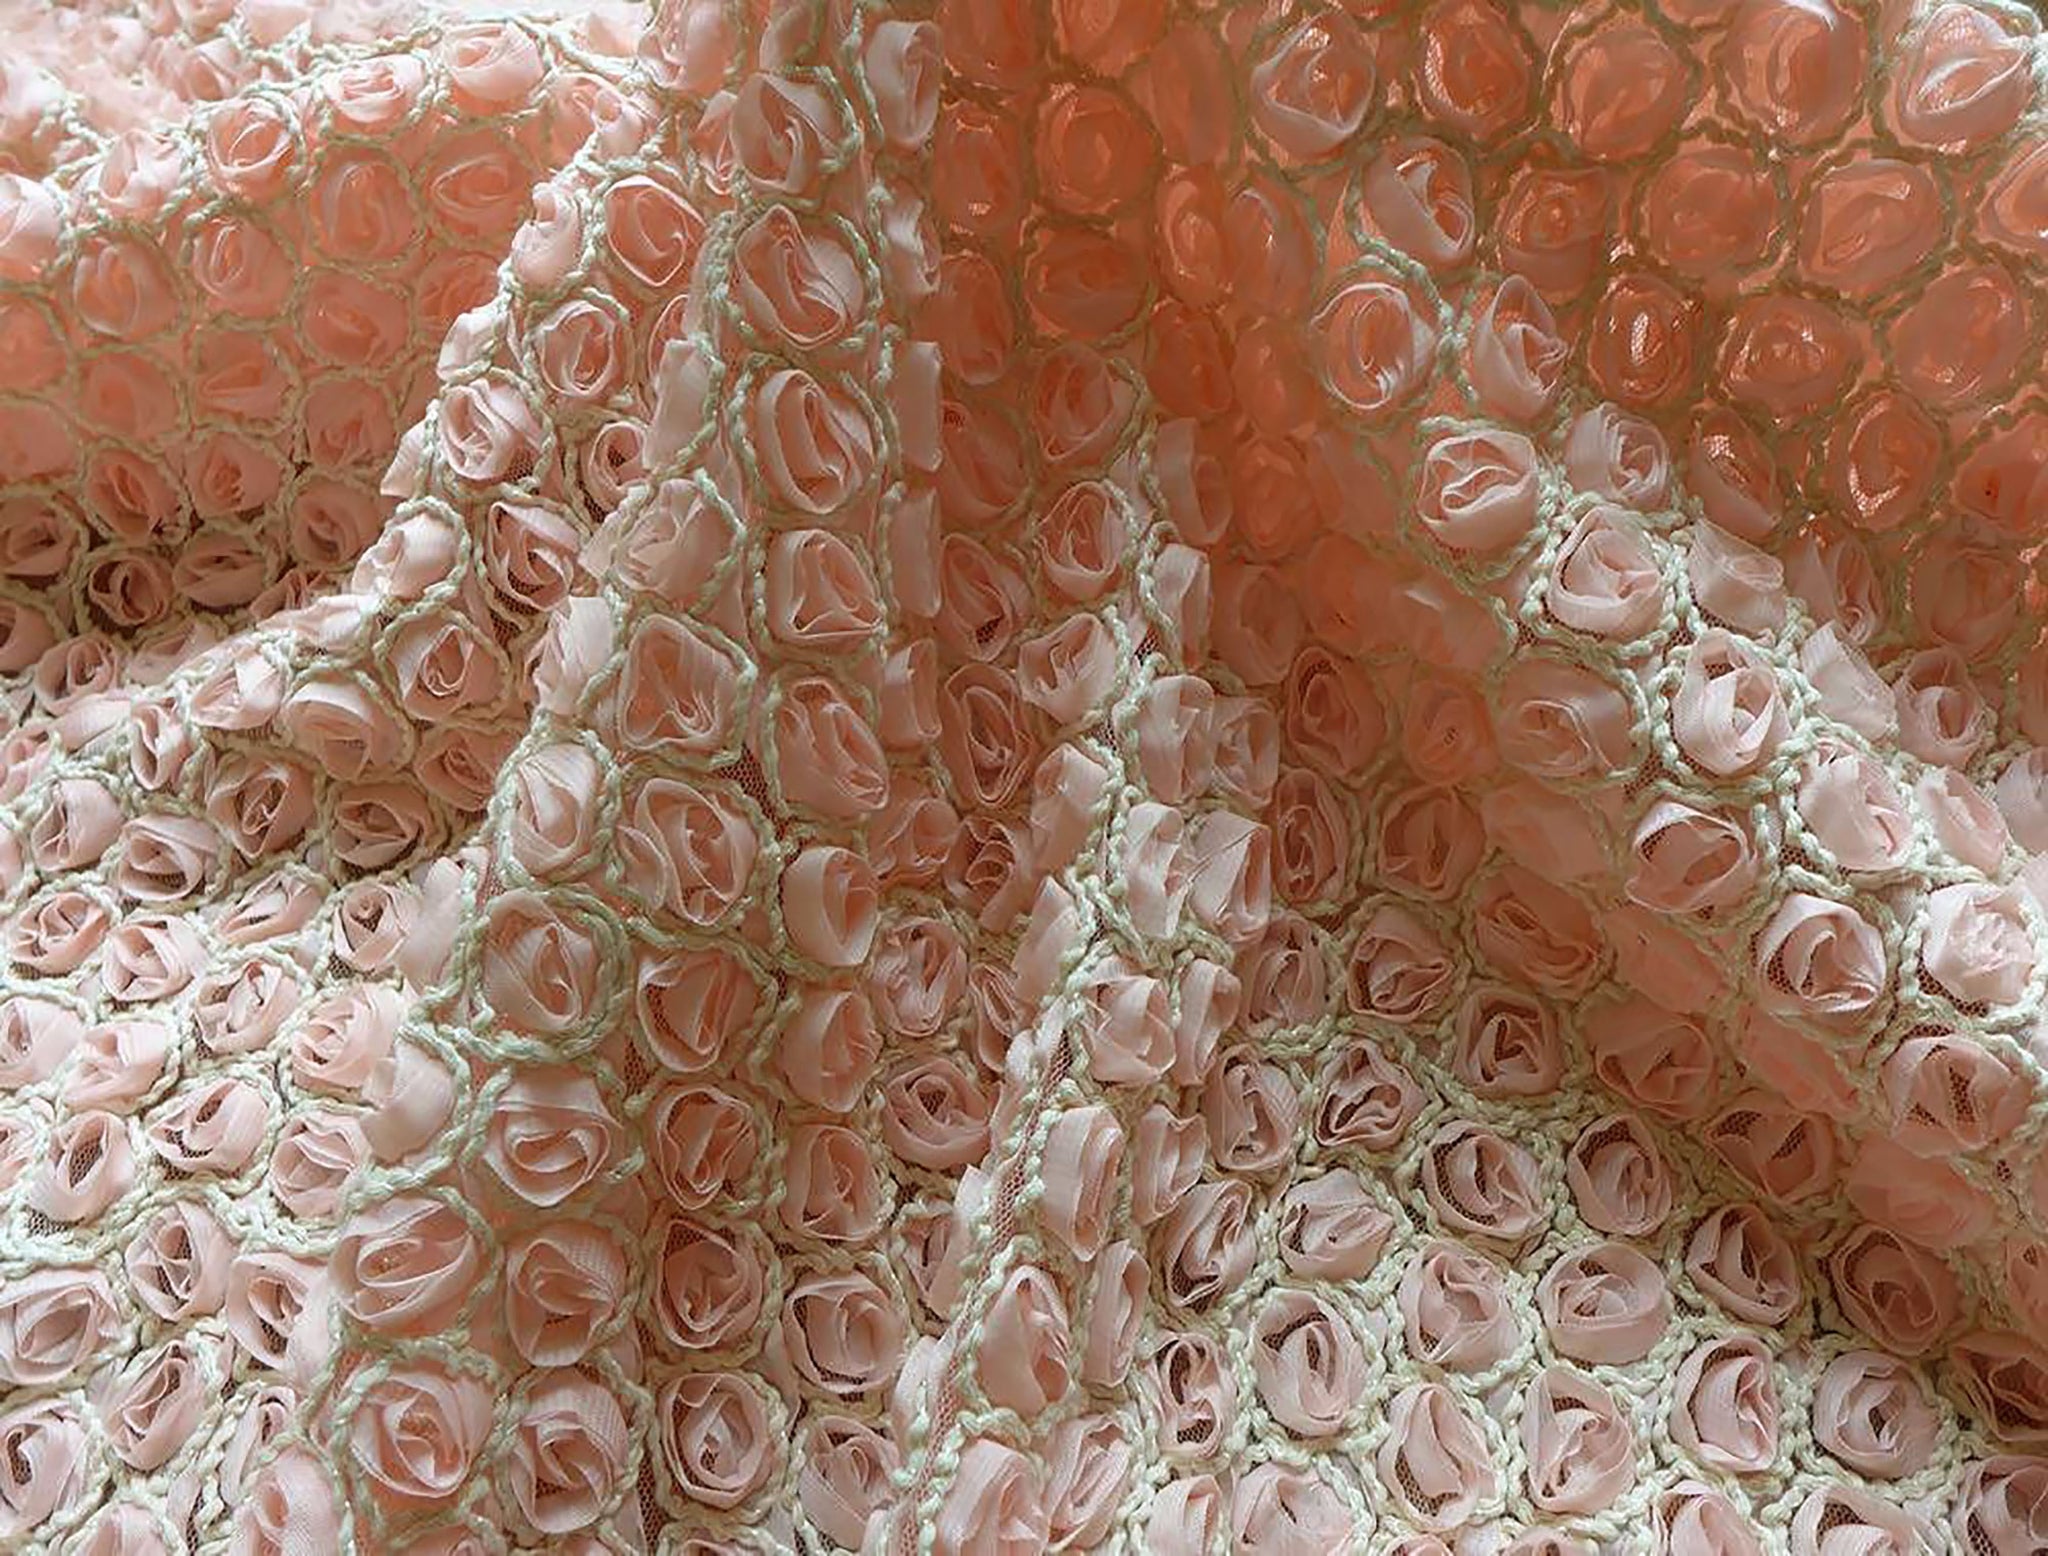 Peach Powder Small All Over Rosettes w/Ivory Rope on Pink Tulle -  Italian Lace - 148 cm Wide.